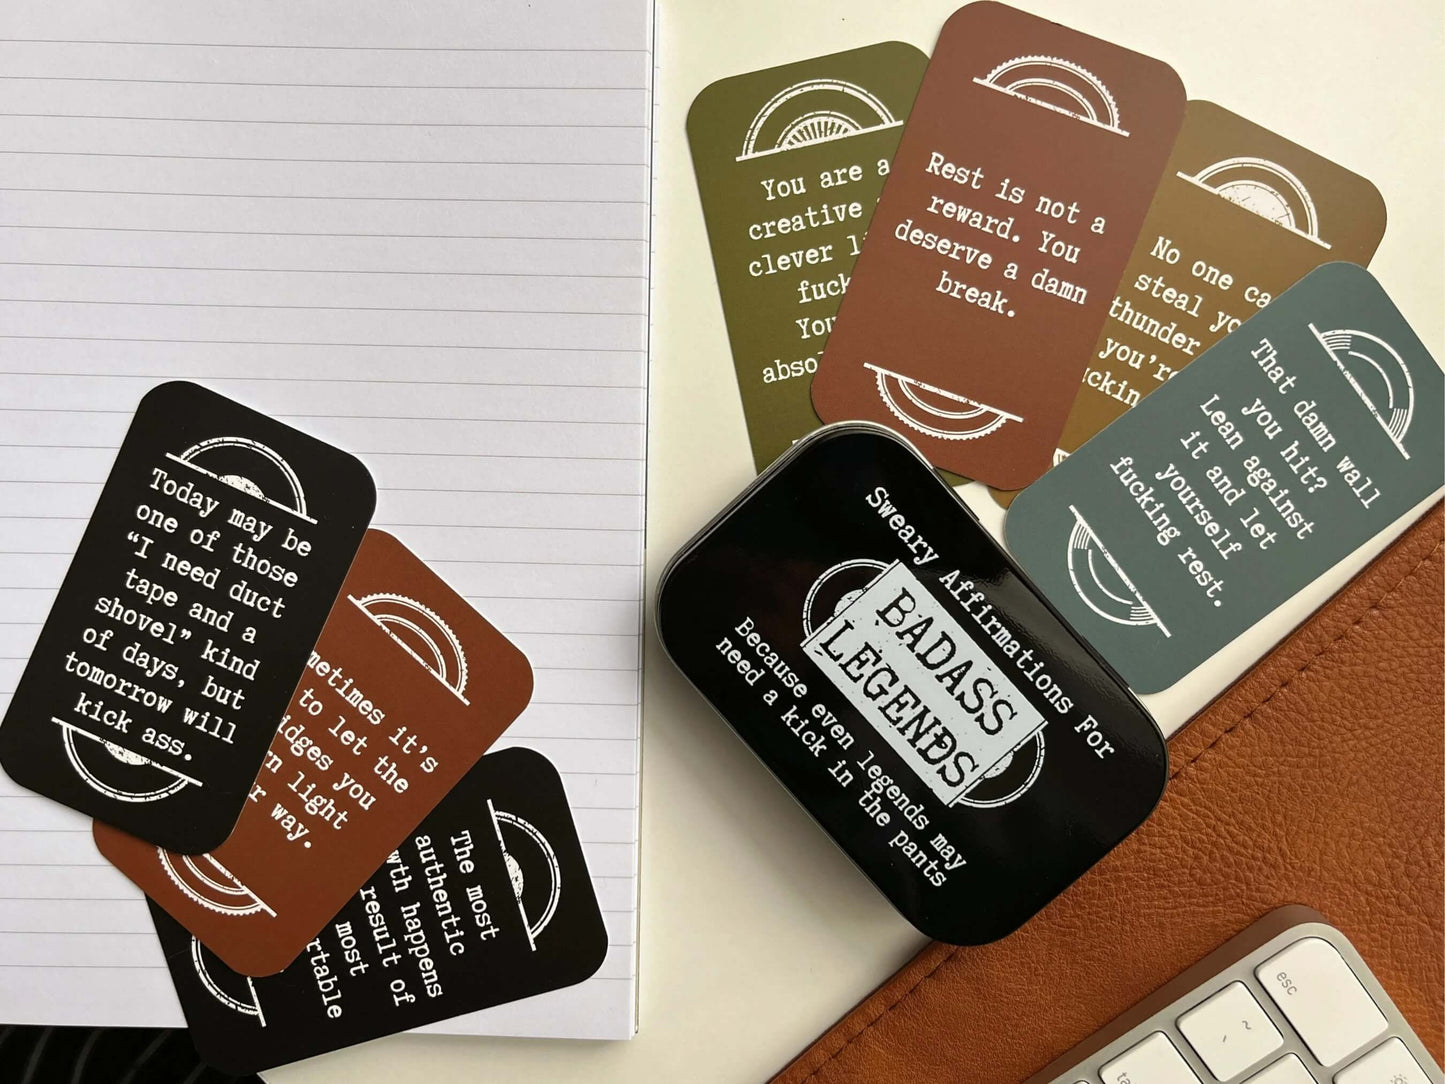 40 Mini Sweary Affirmation Cards for Badass Legends | Black Tin Included for Storage | Business Card Size